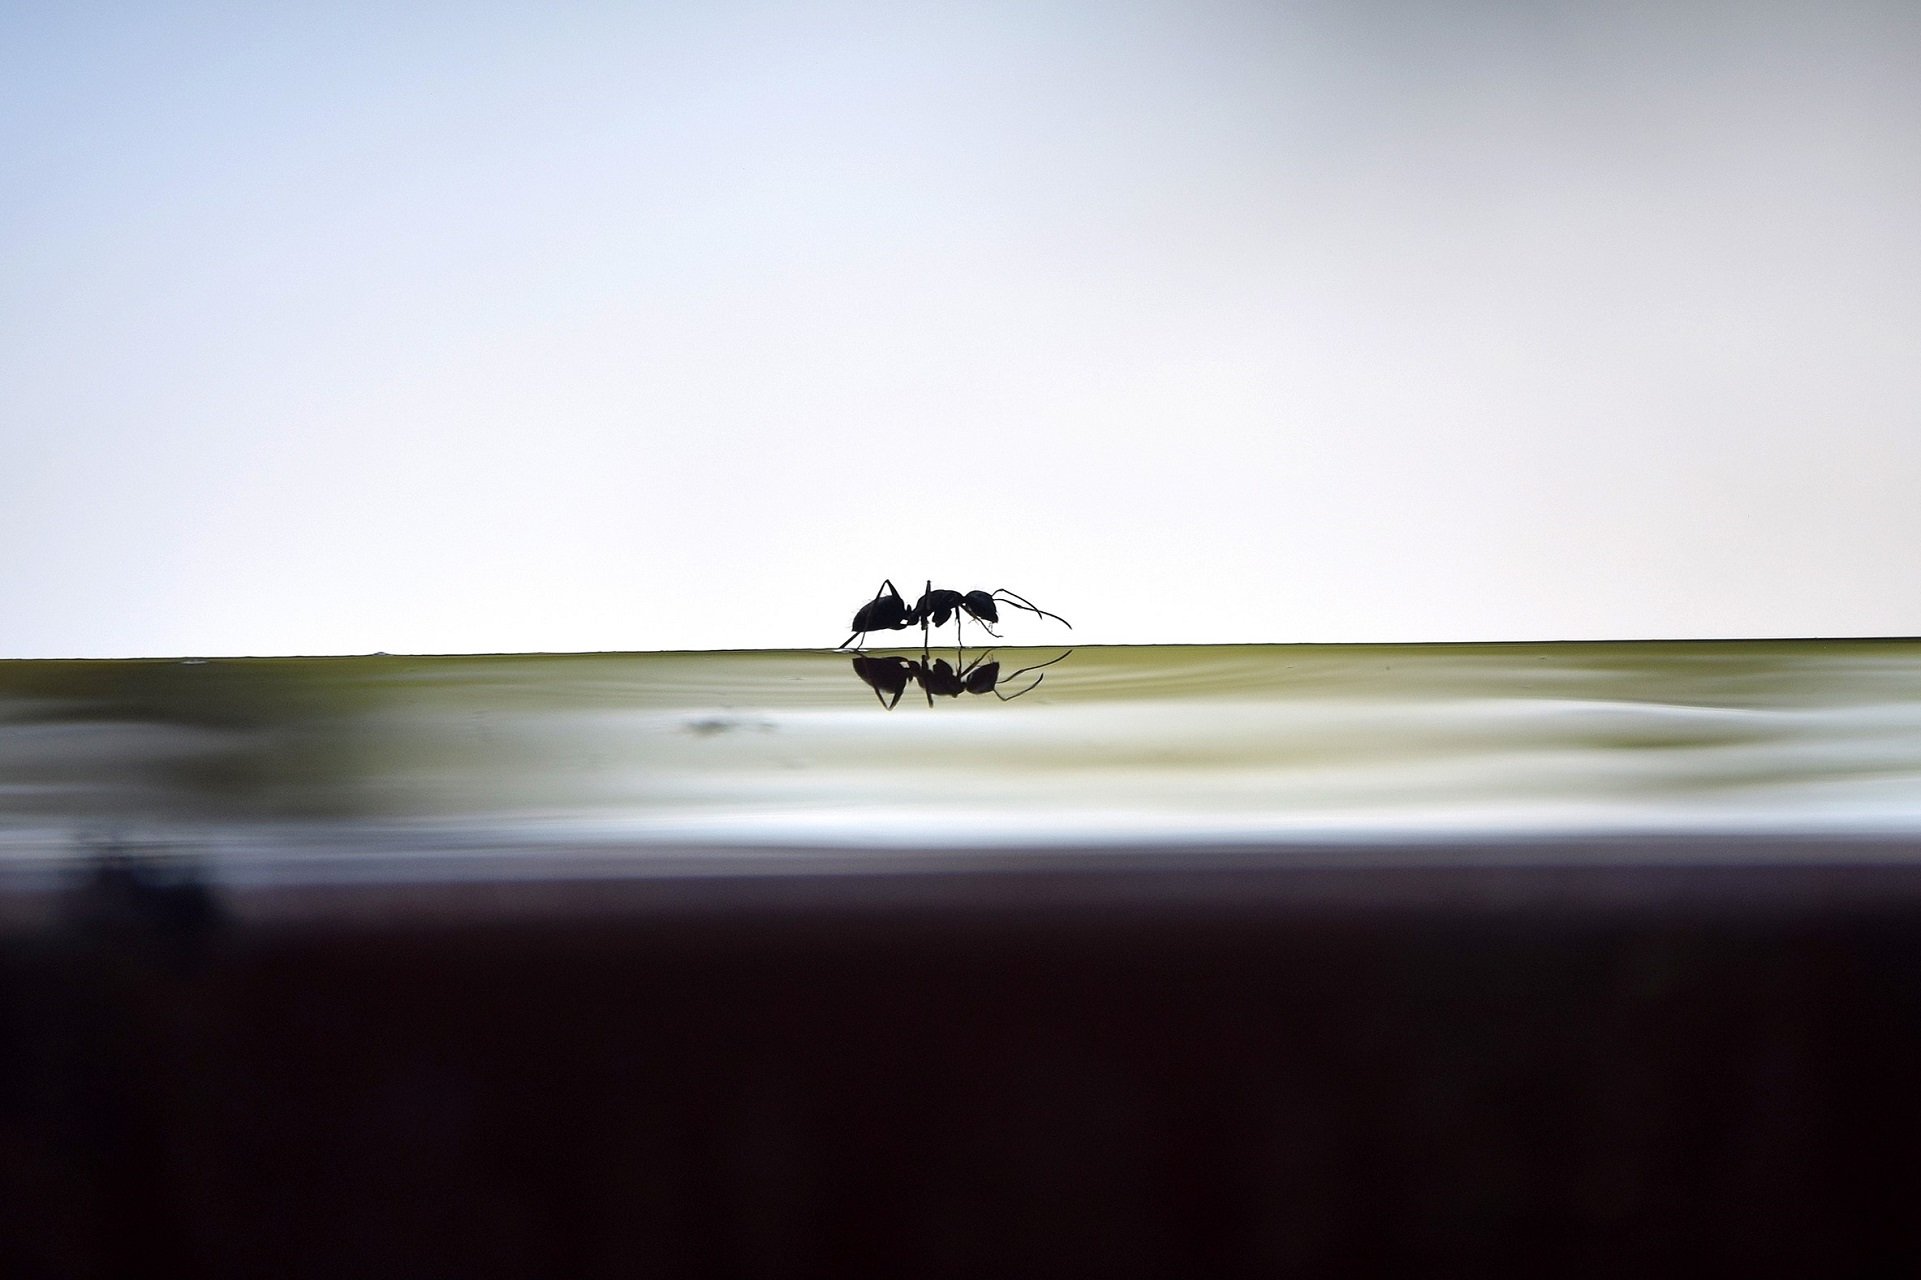 An ant is silhouetted as it crawls along a surface.